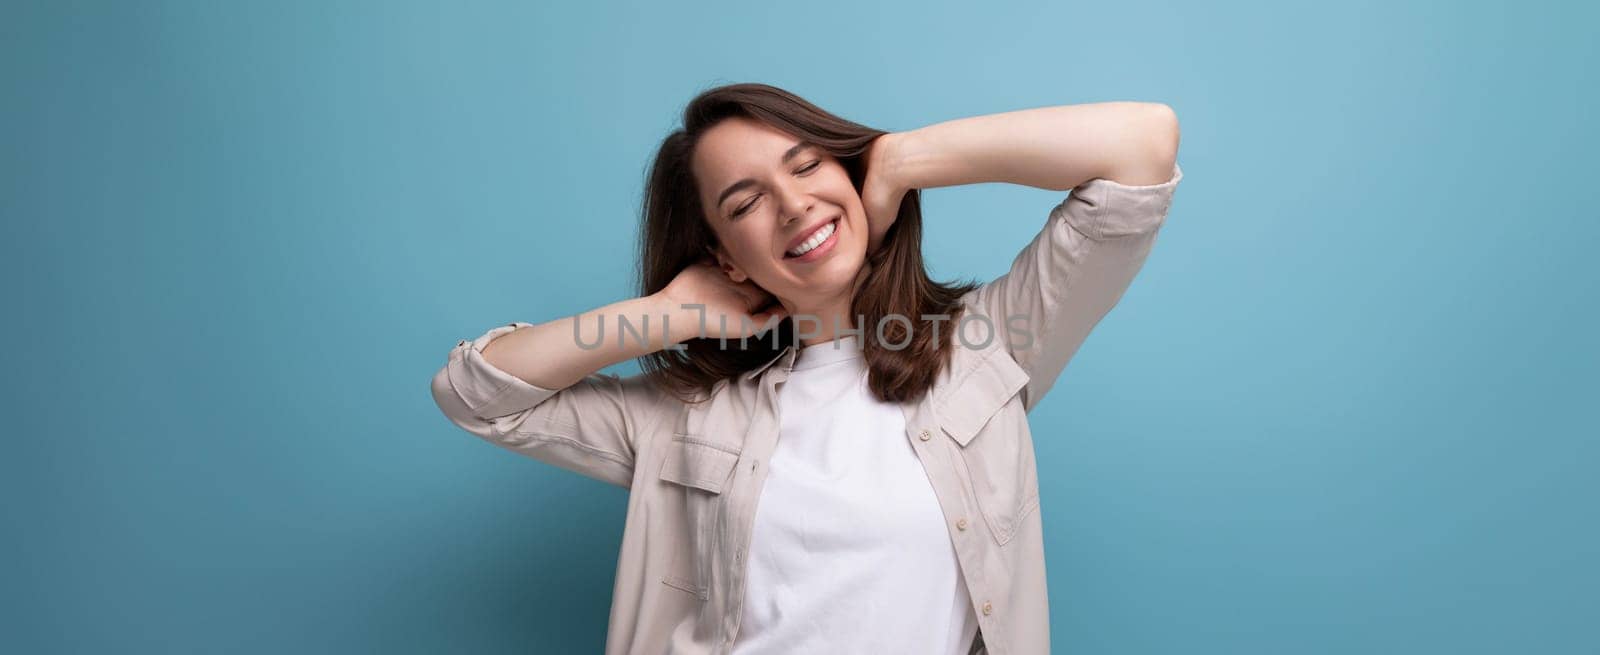 pretty 25 year old woman in a casual look smiles cutely on a blue background.